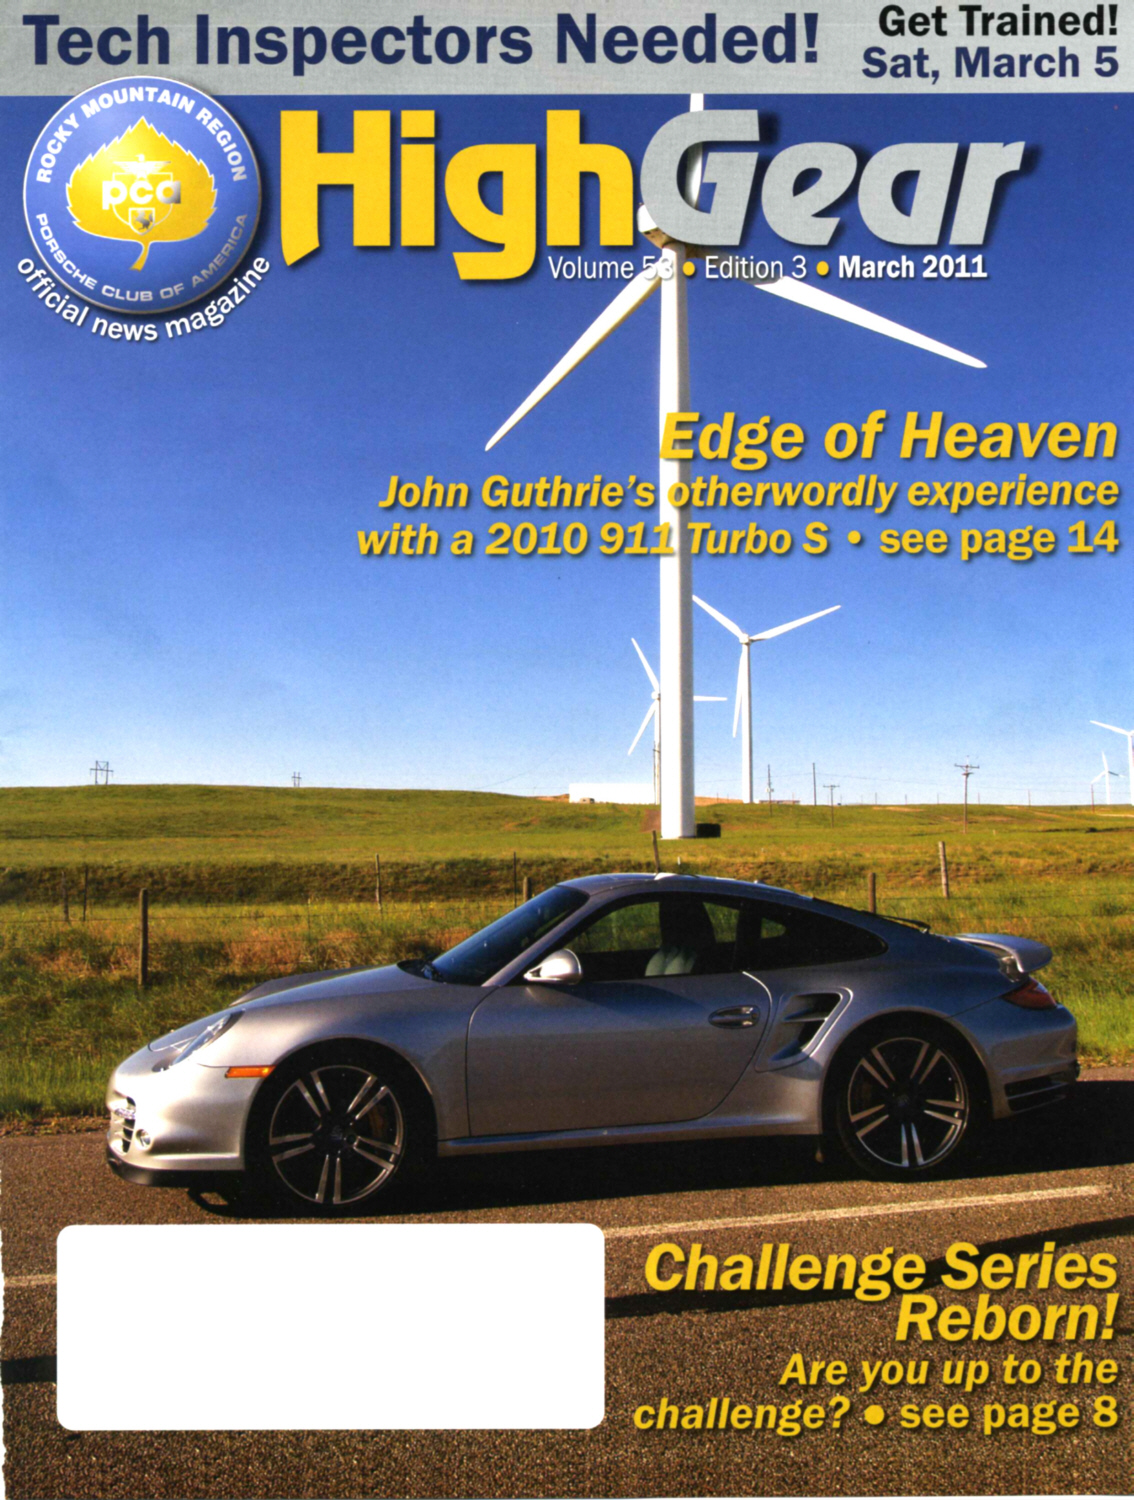 As owner of one of the first 2011 Porsche 911 Turbo S to come to the USA, I described its performance in this cover story.